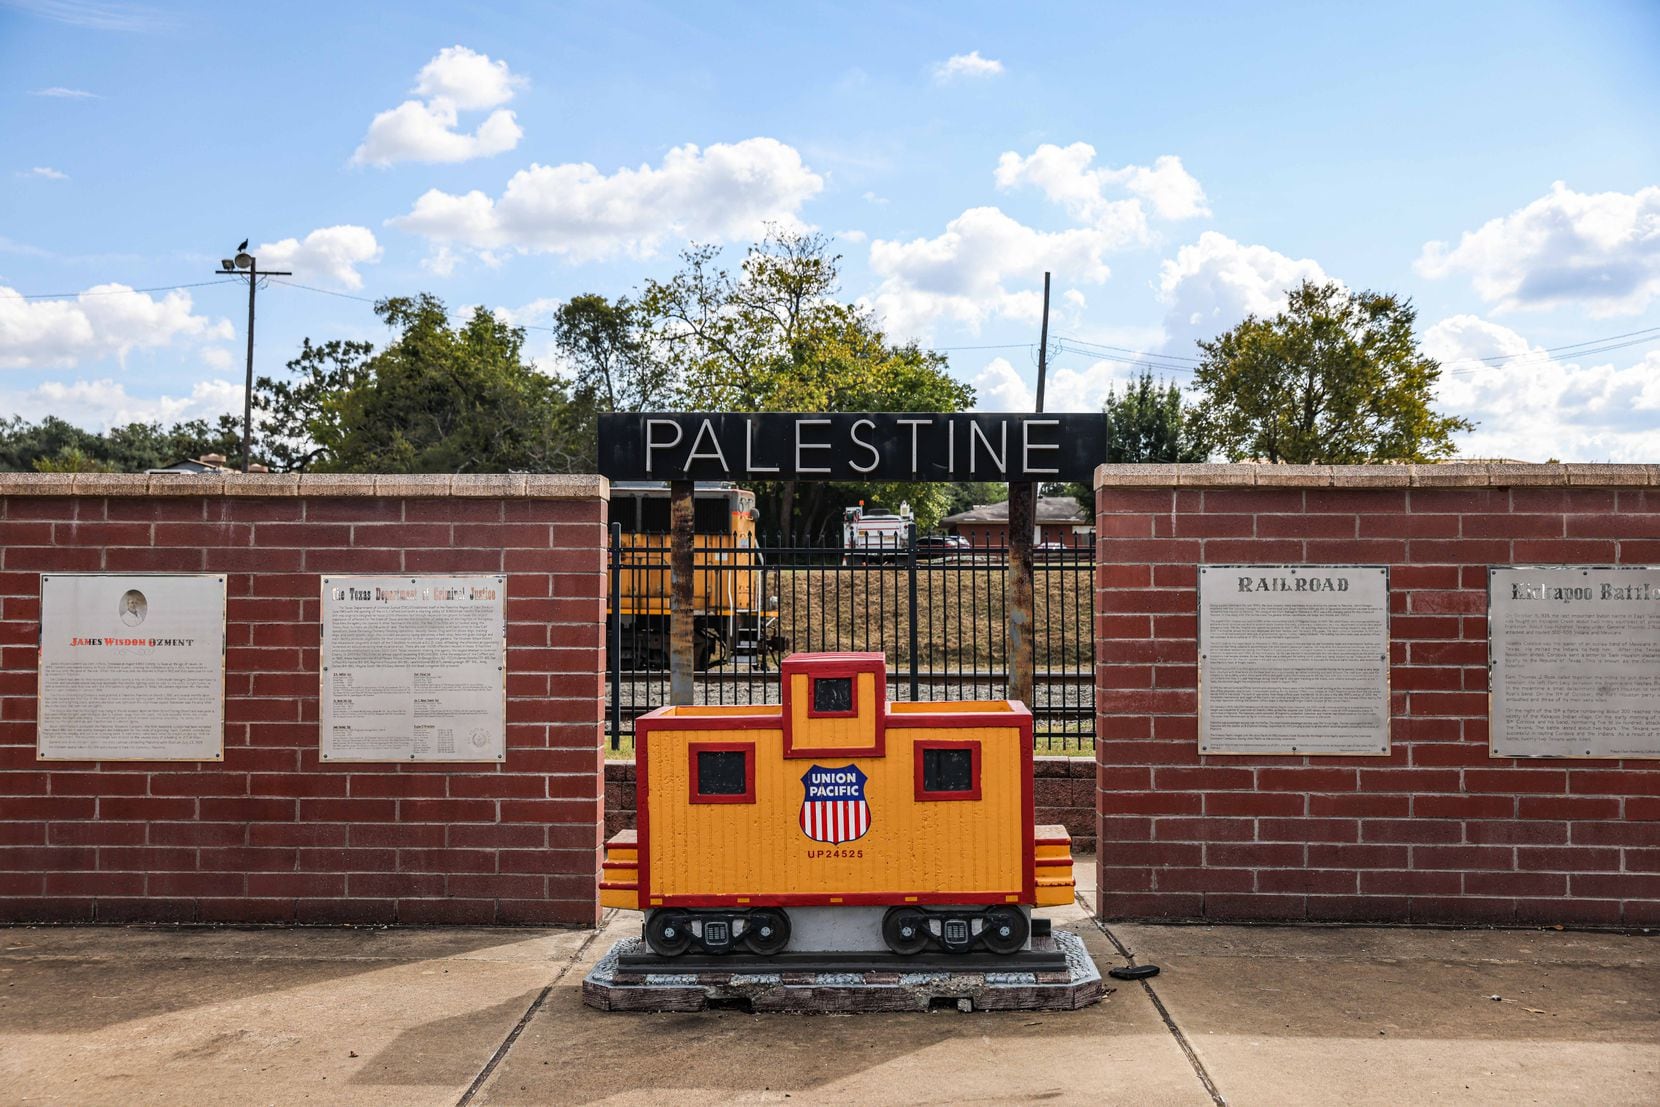 Palestine, Texas, was once a major hub of railroad activity. Since the 1960s, it has also...